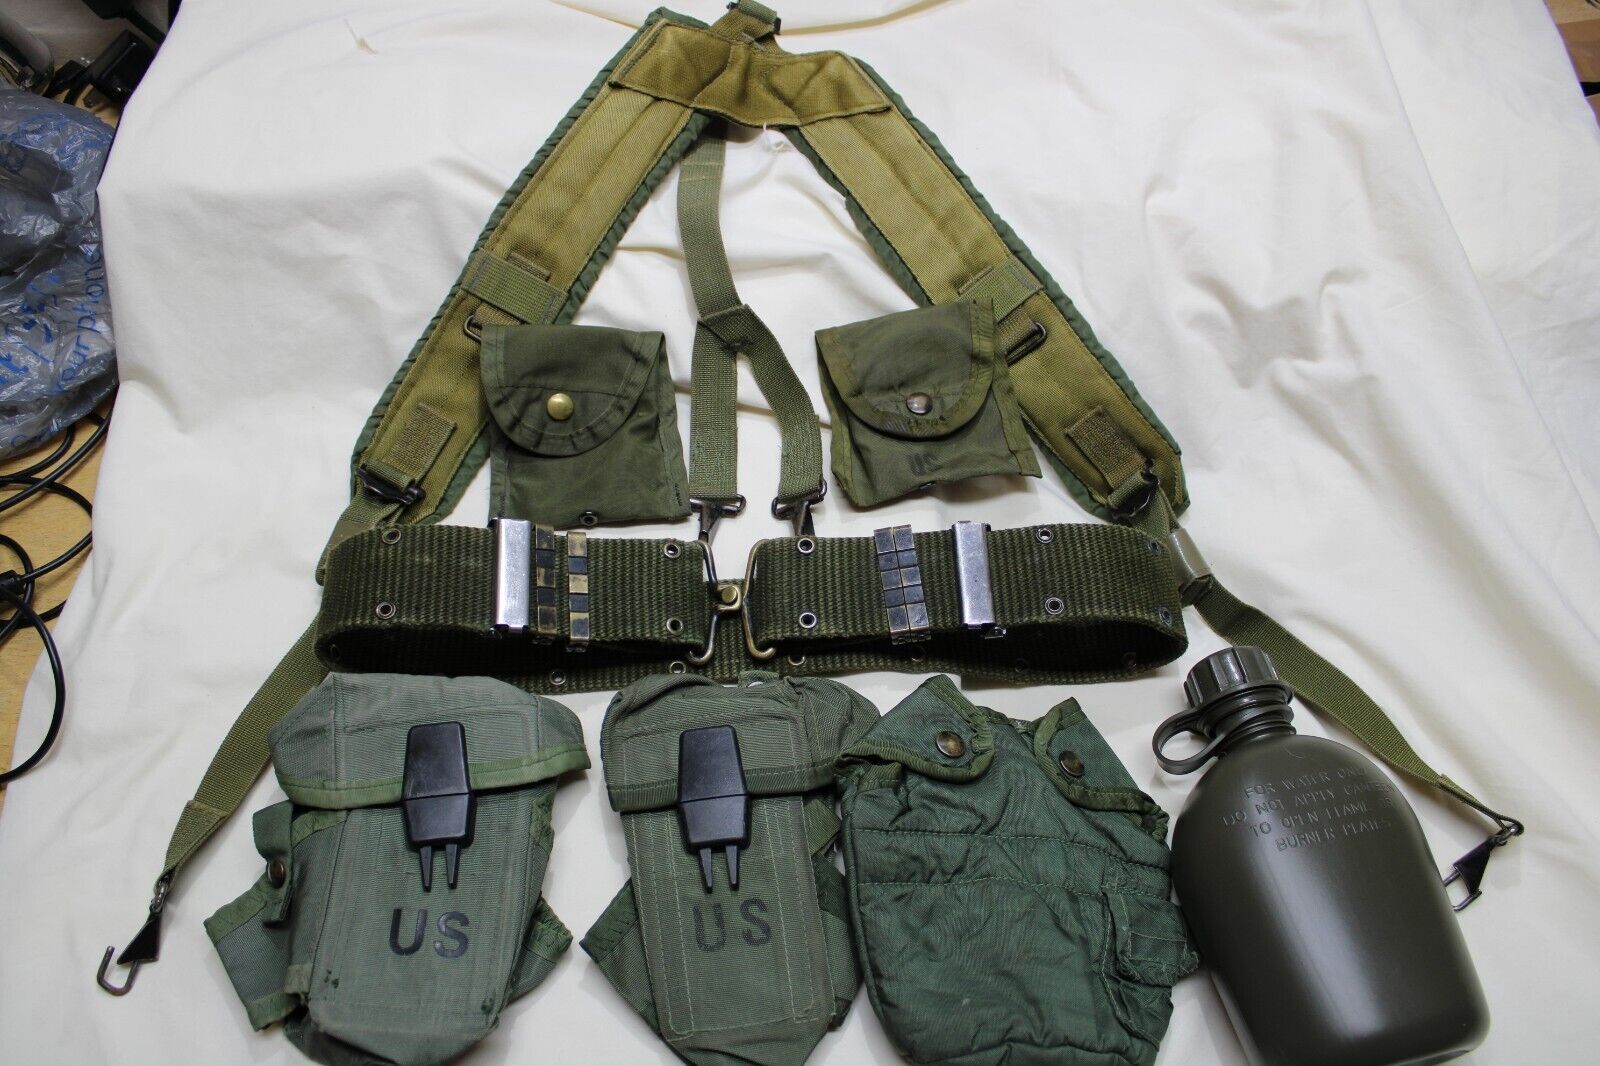 US Military Issue Alice Field Gear Web Belt Suspenders Ammo Pouches Canteen Set